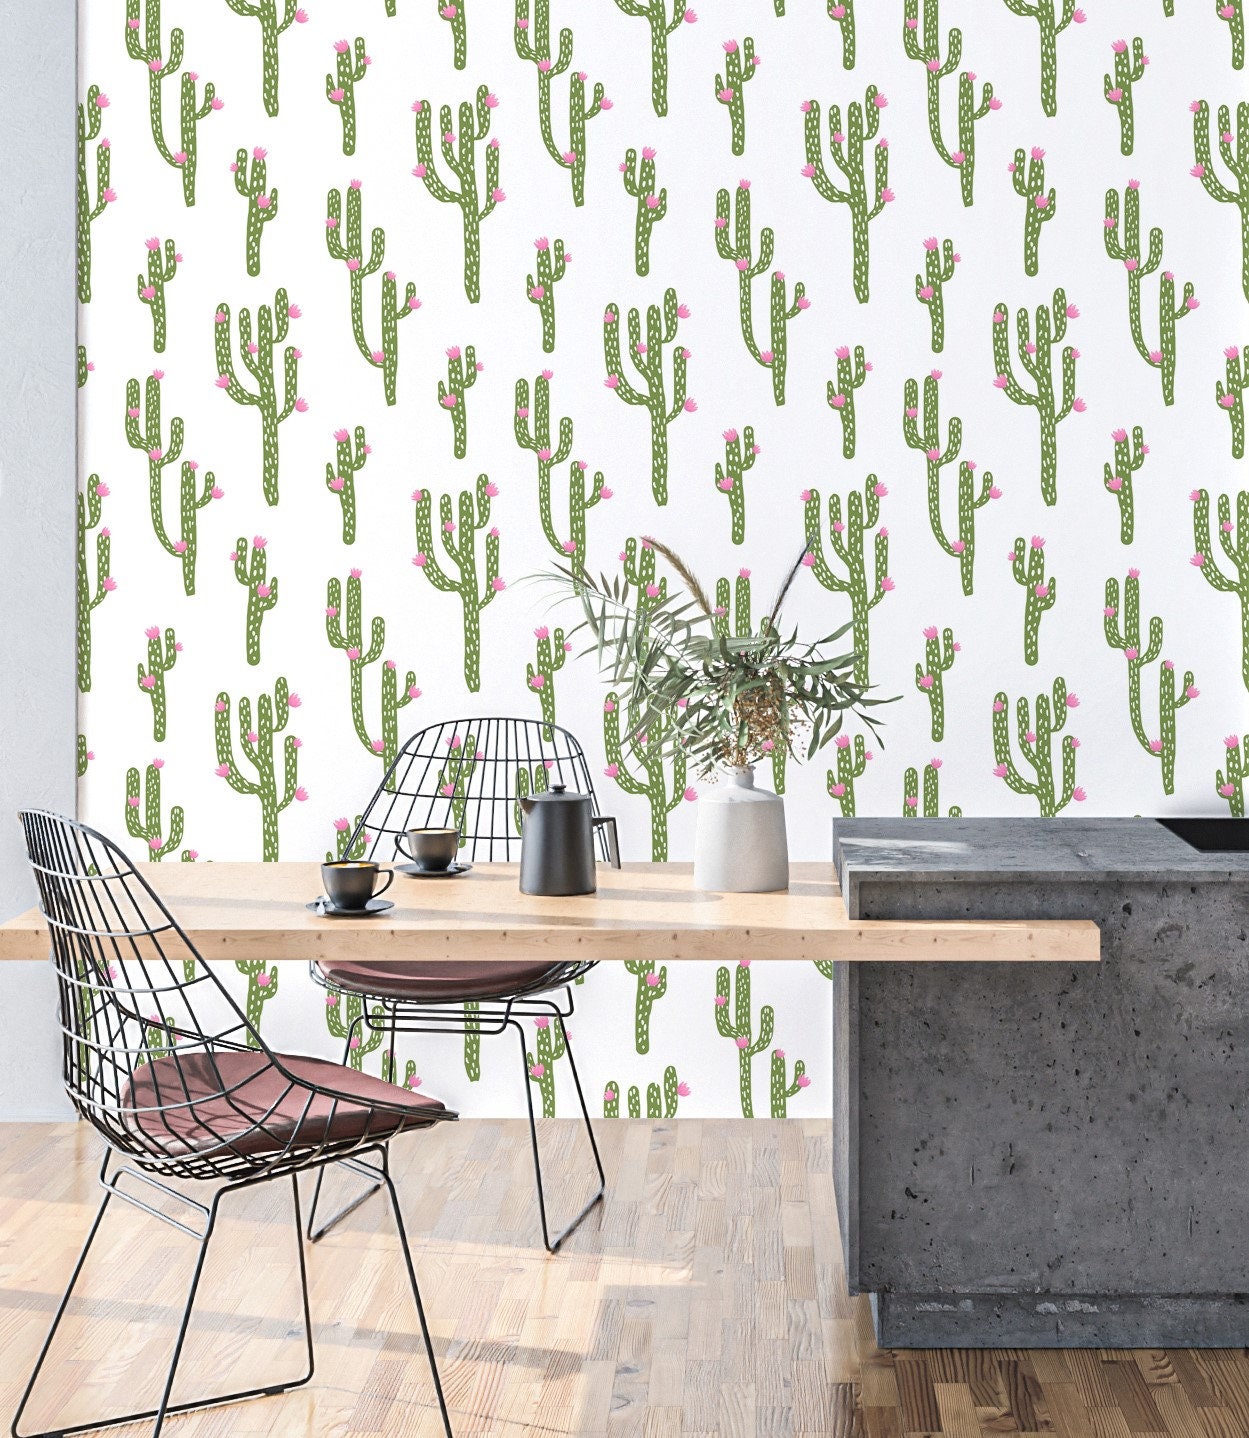 Cactus Wallpaper Peel and Stick, Tropical Wallpaper, Plant Wallpaper, Removable Wall Paper